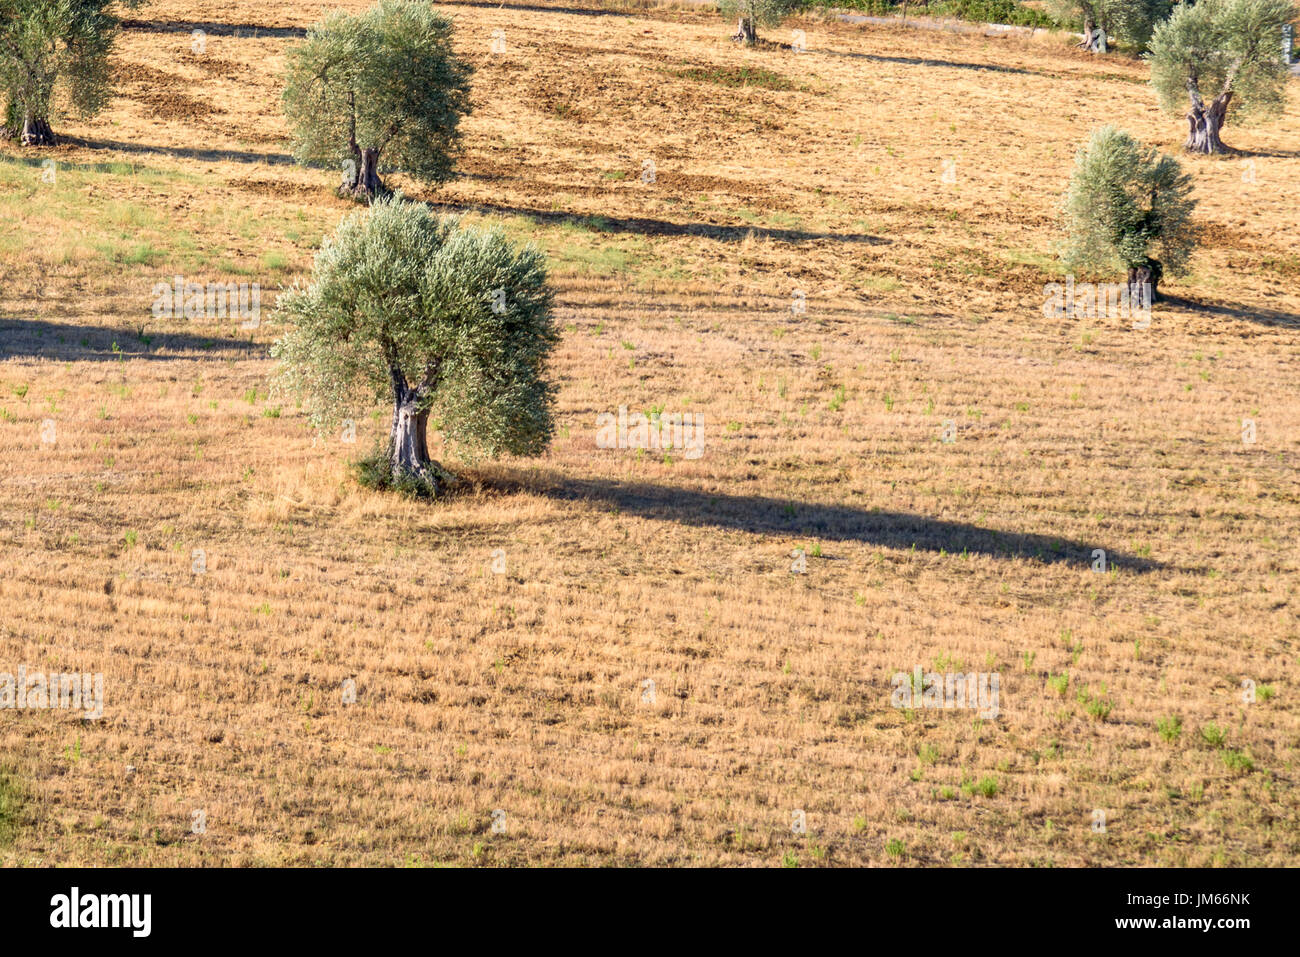 An olive tree in a middle of a field in Tuscany Stock Photo